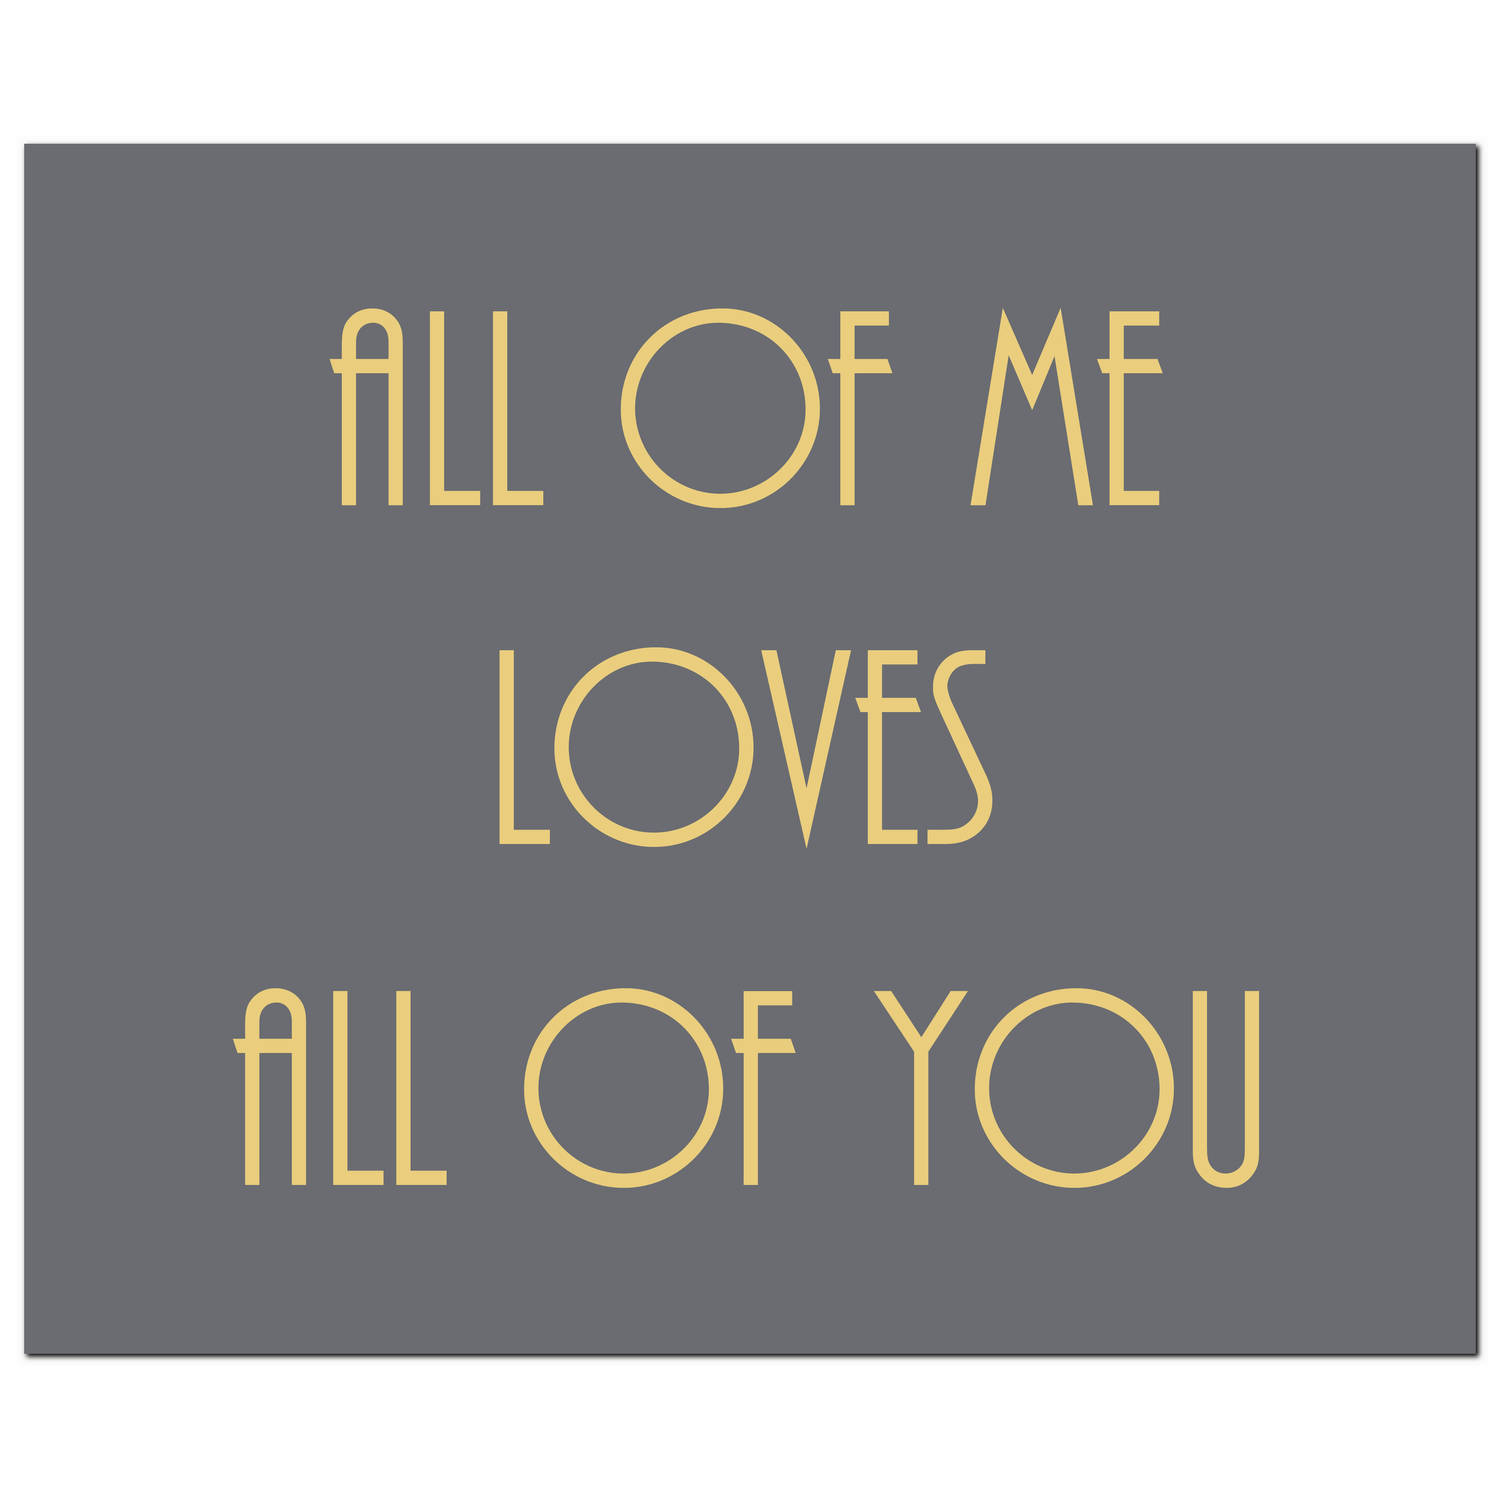 All Of Me Loves All Of You Gold Foil Plaque - Image 1